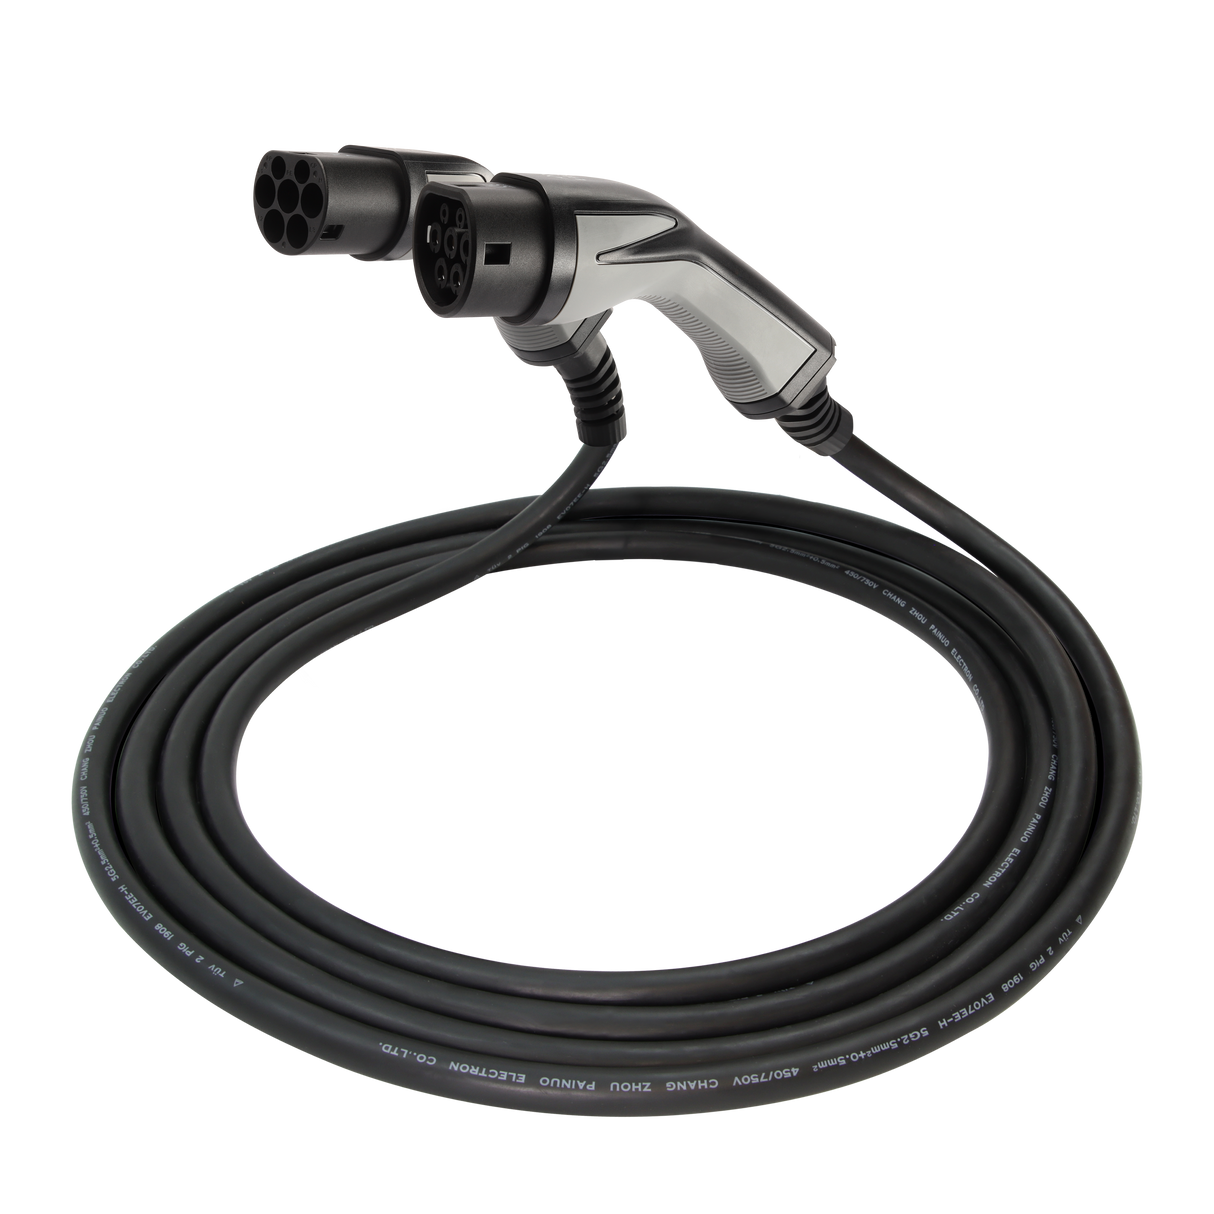 Charging cable BMW IX - Erock Pro Type 2 - 16A 3 phase (11 kW)